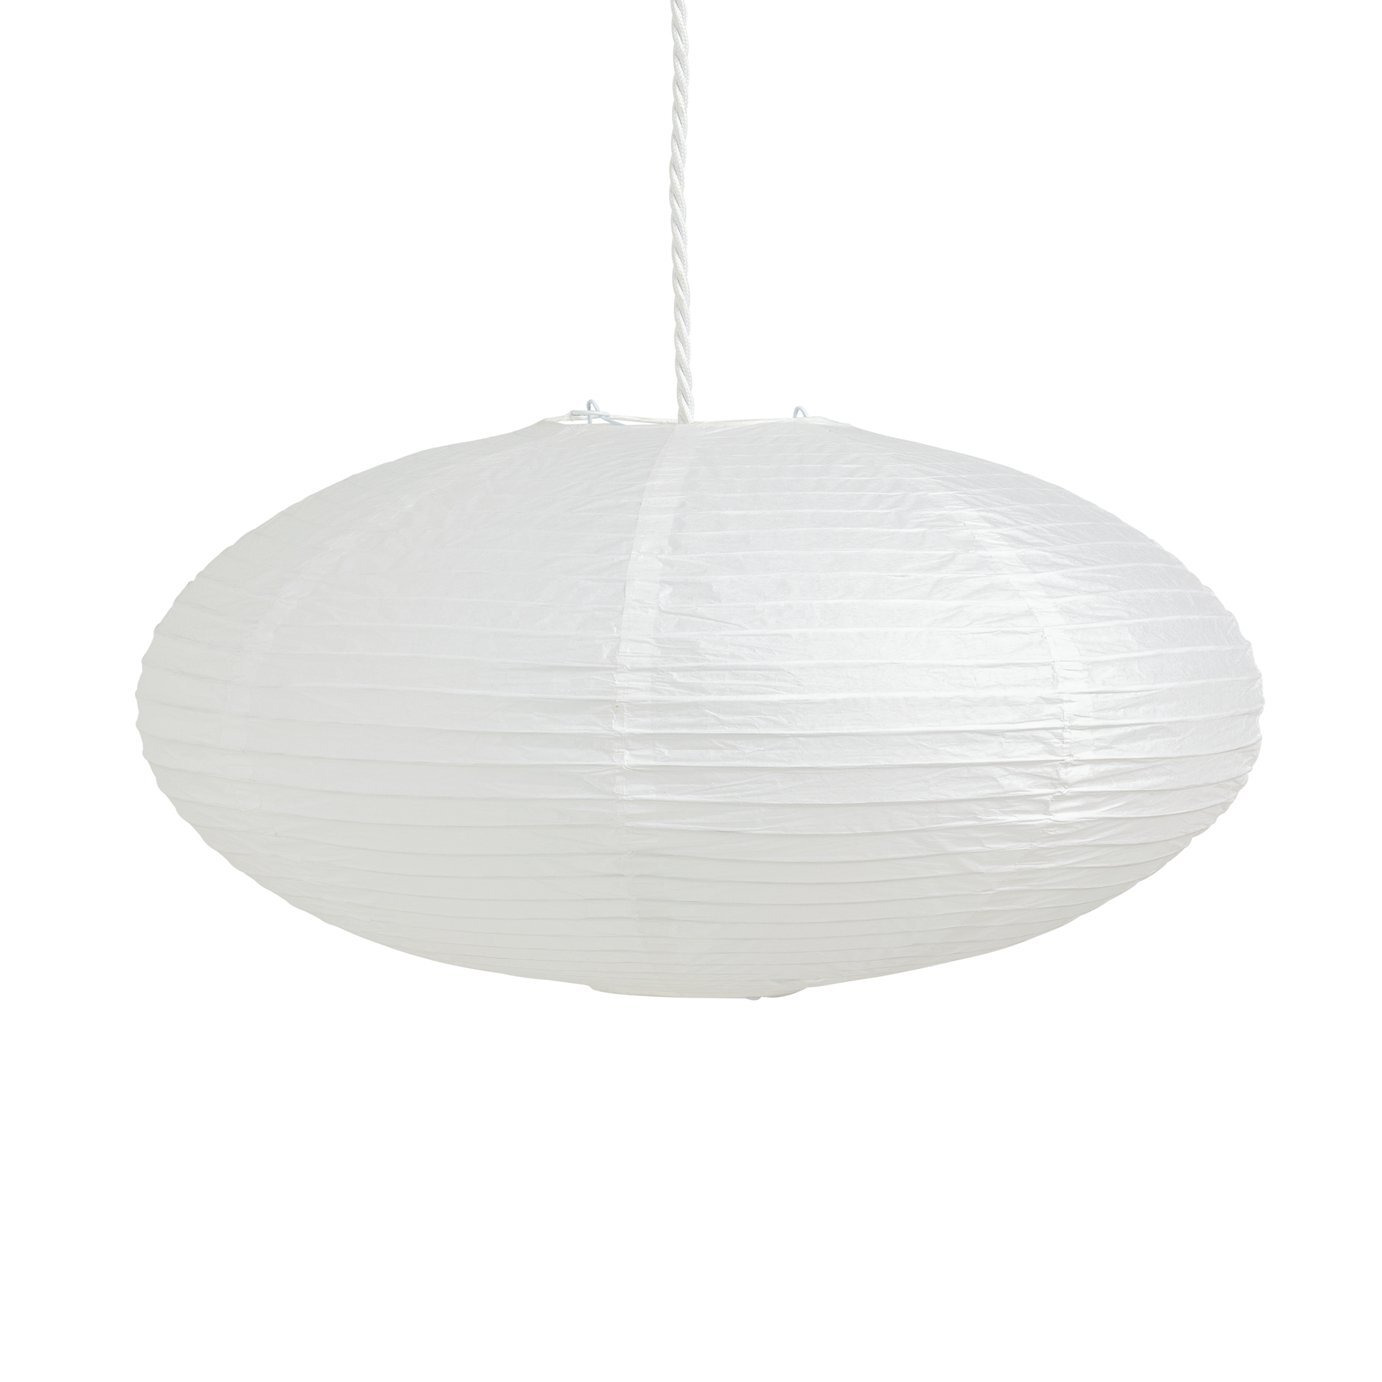 Habitat Varro Easy to Fit Paper Shade - White - image 1